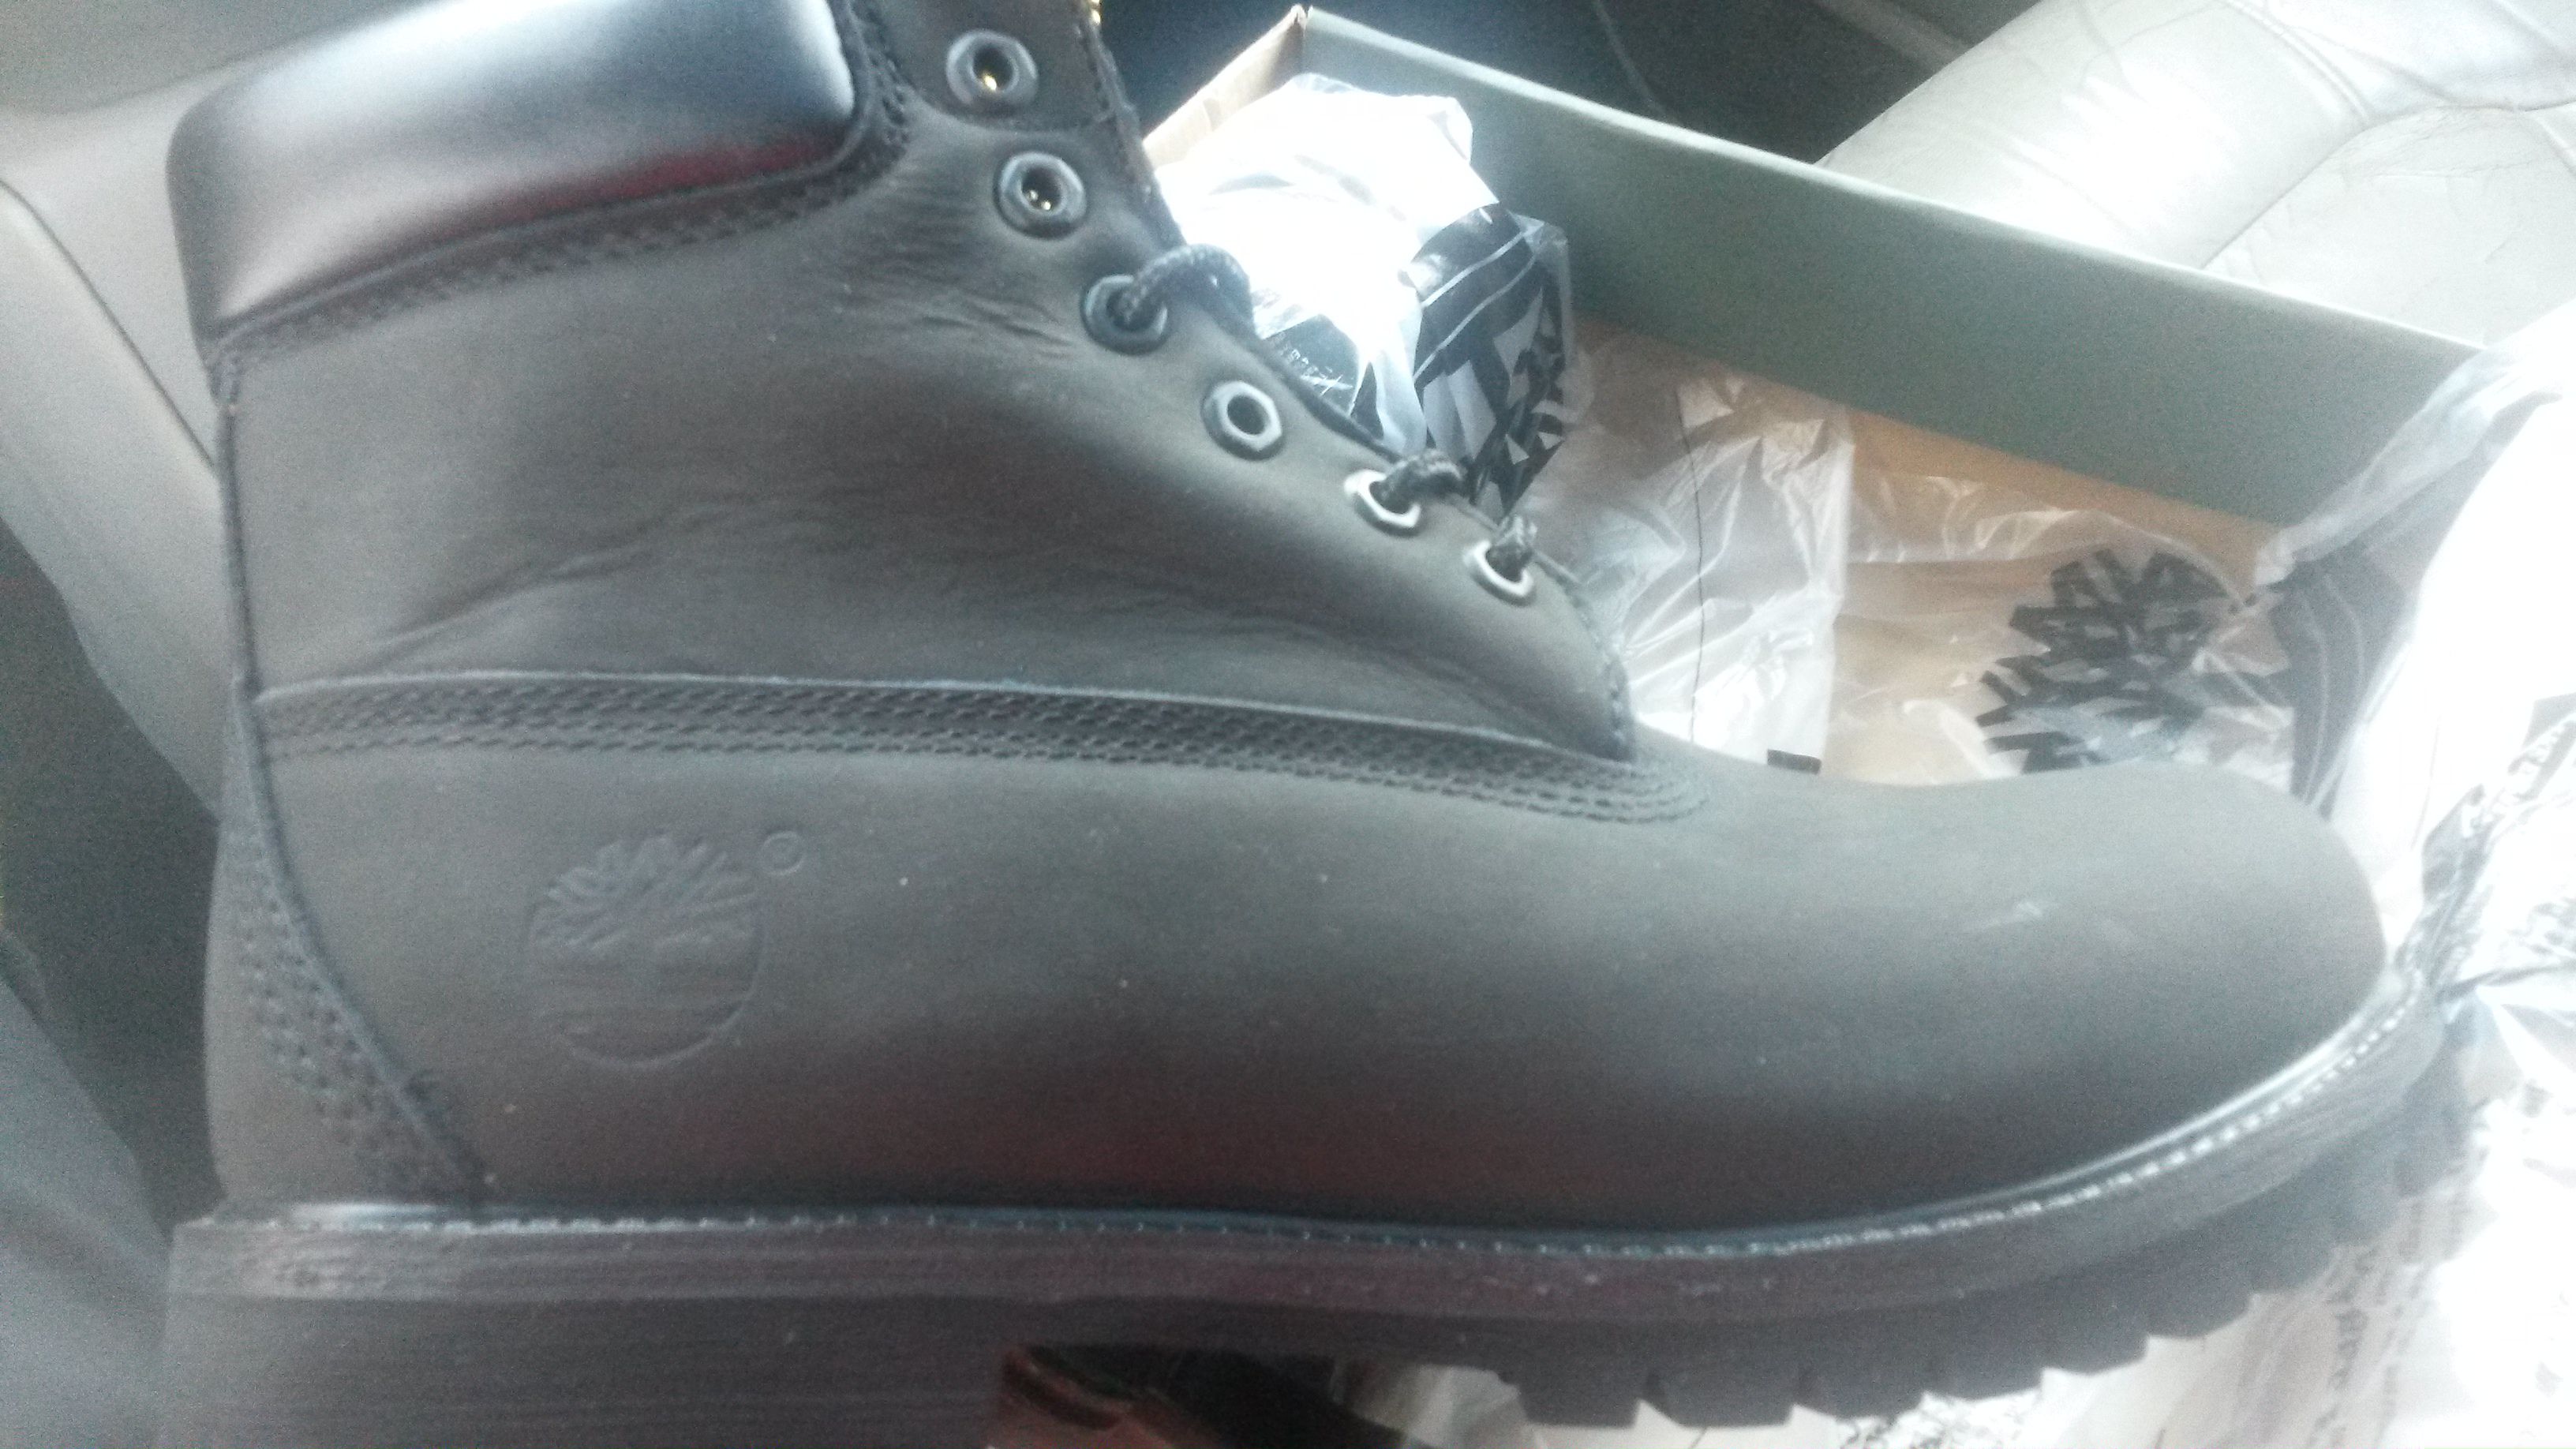 Last blk timberland boot 9.5 for the low!!!!